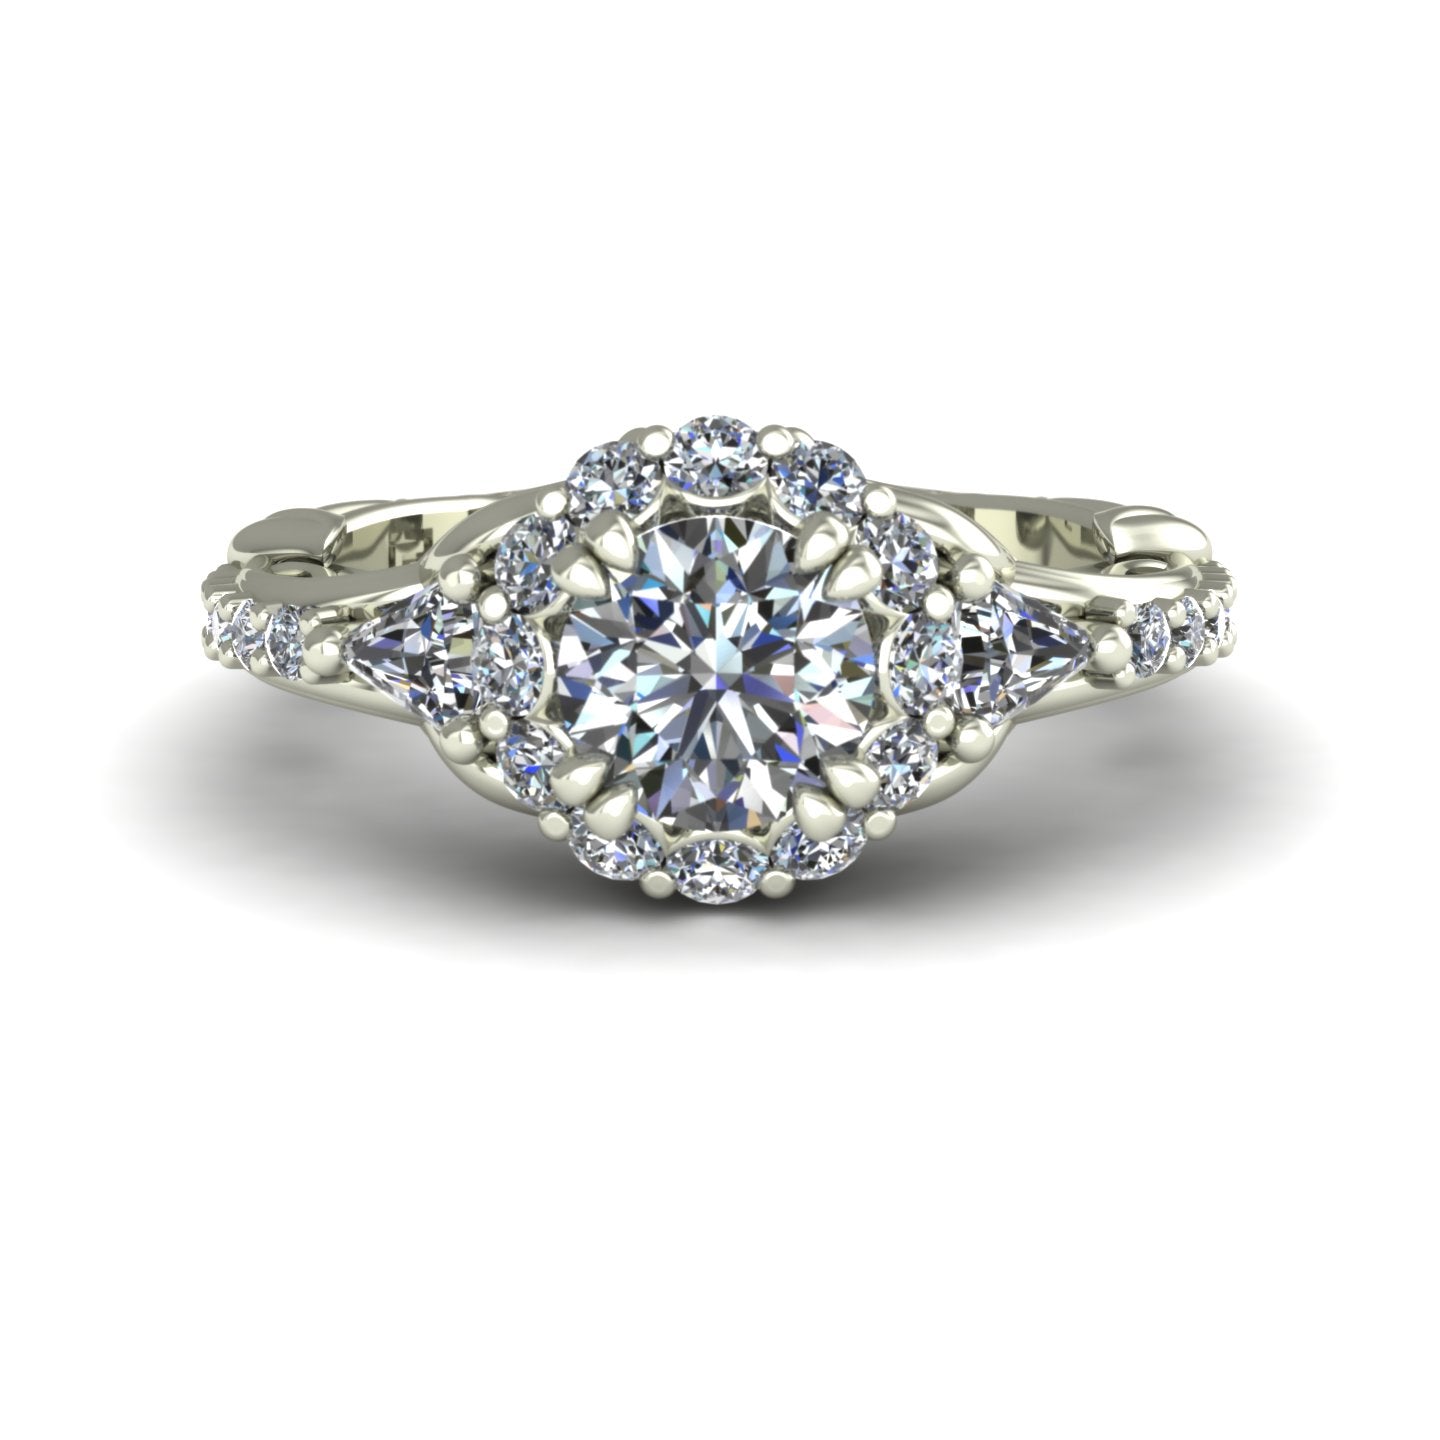 1ct diamond halo engagement ring with trillions and vines in 14k white gold - Charles Babb Designs - top view